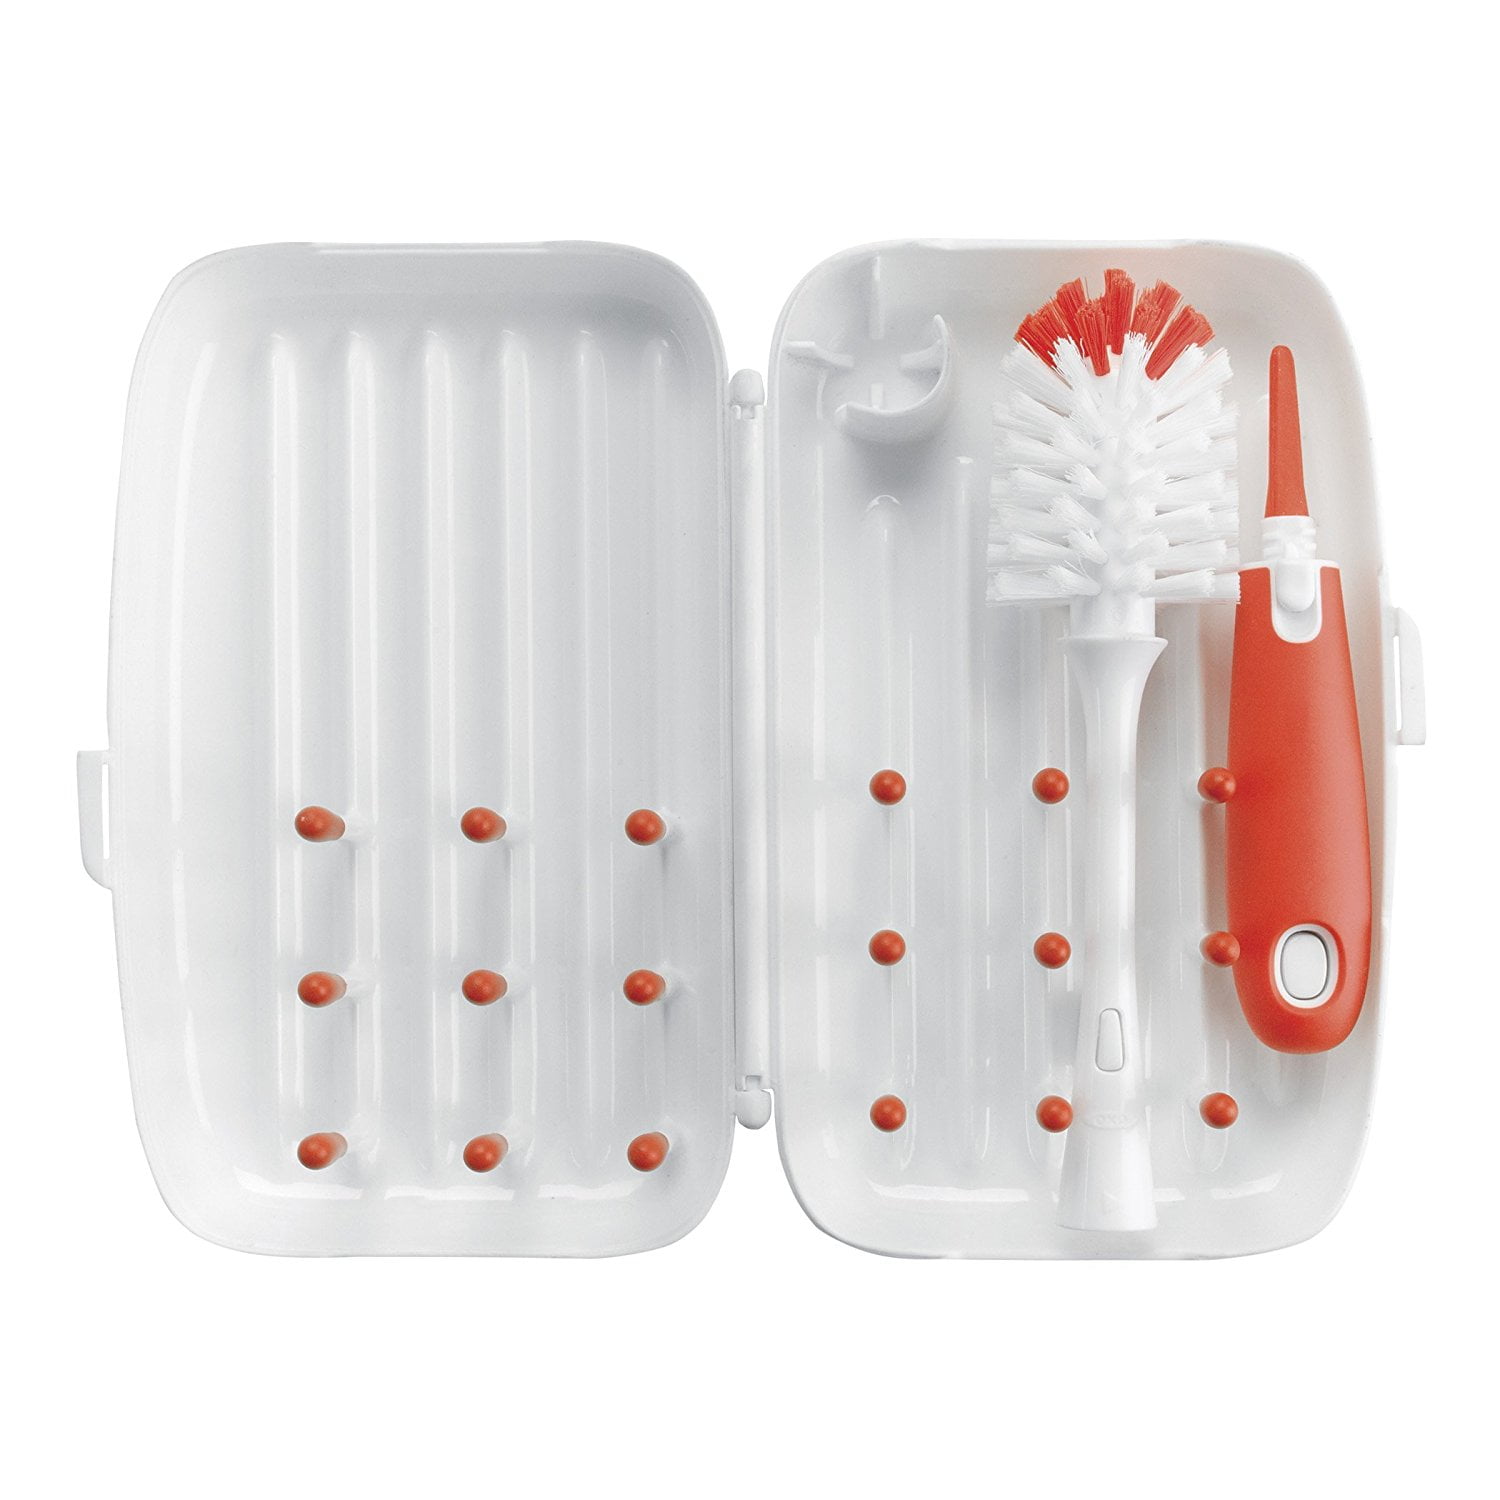 OXO Tot On-the-go Drying Rack With Bottle Brush - Gray – Traveling Tikes